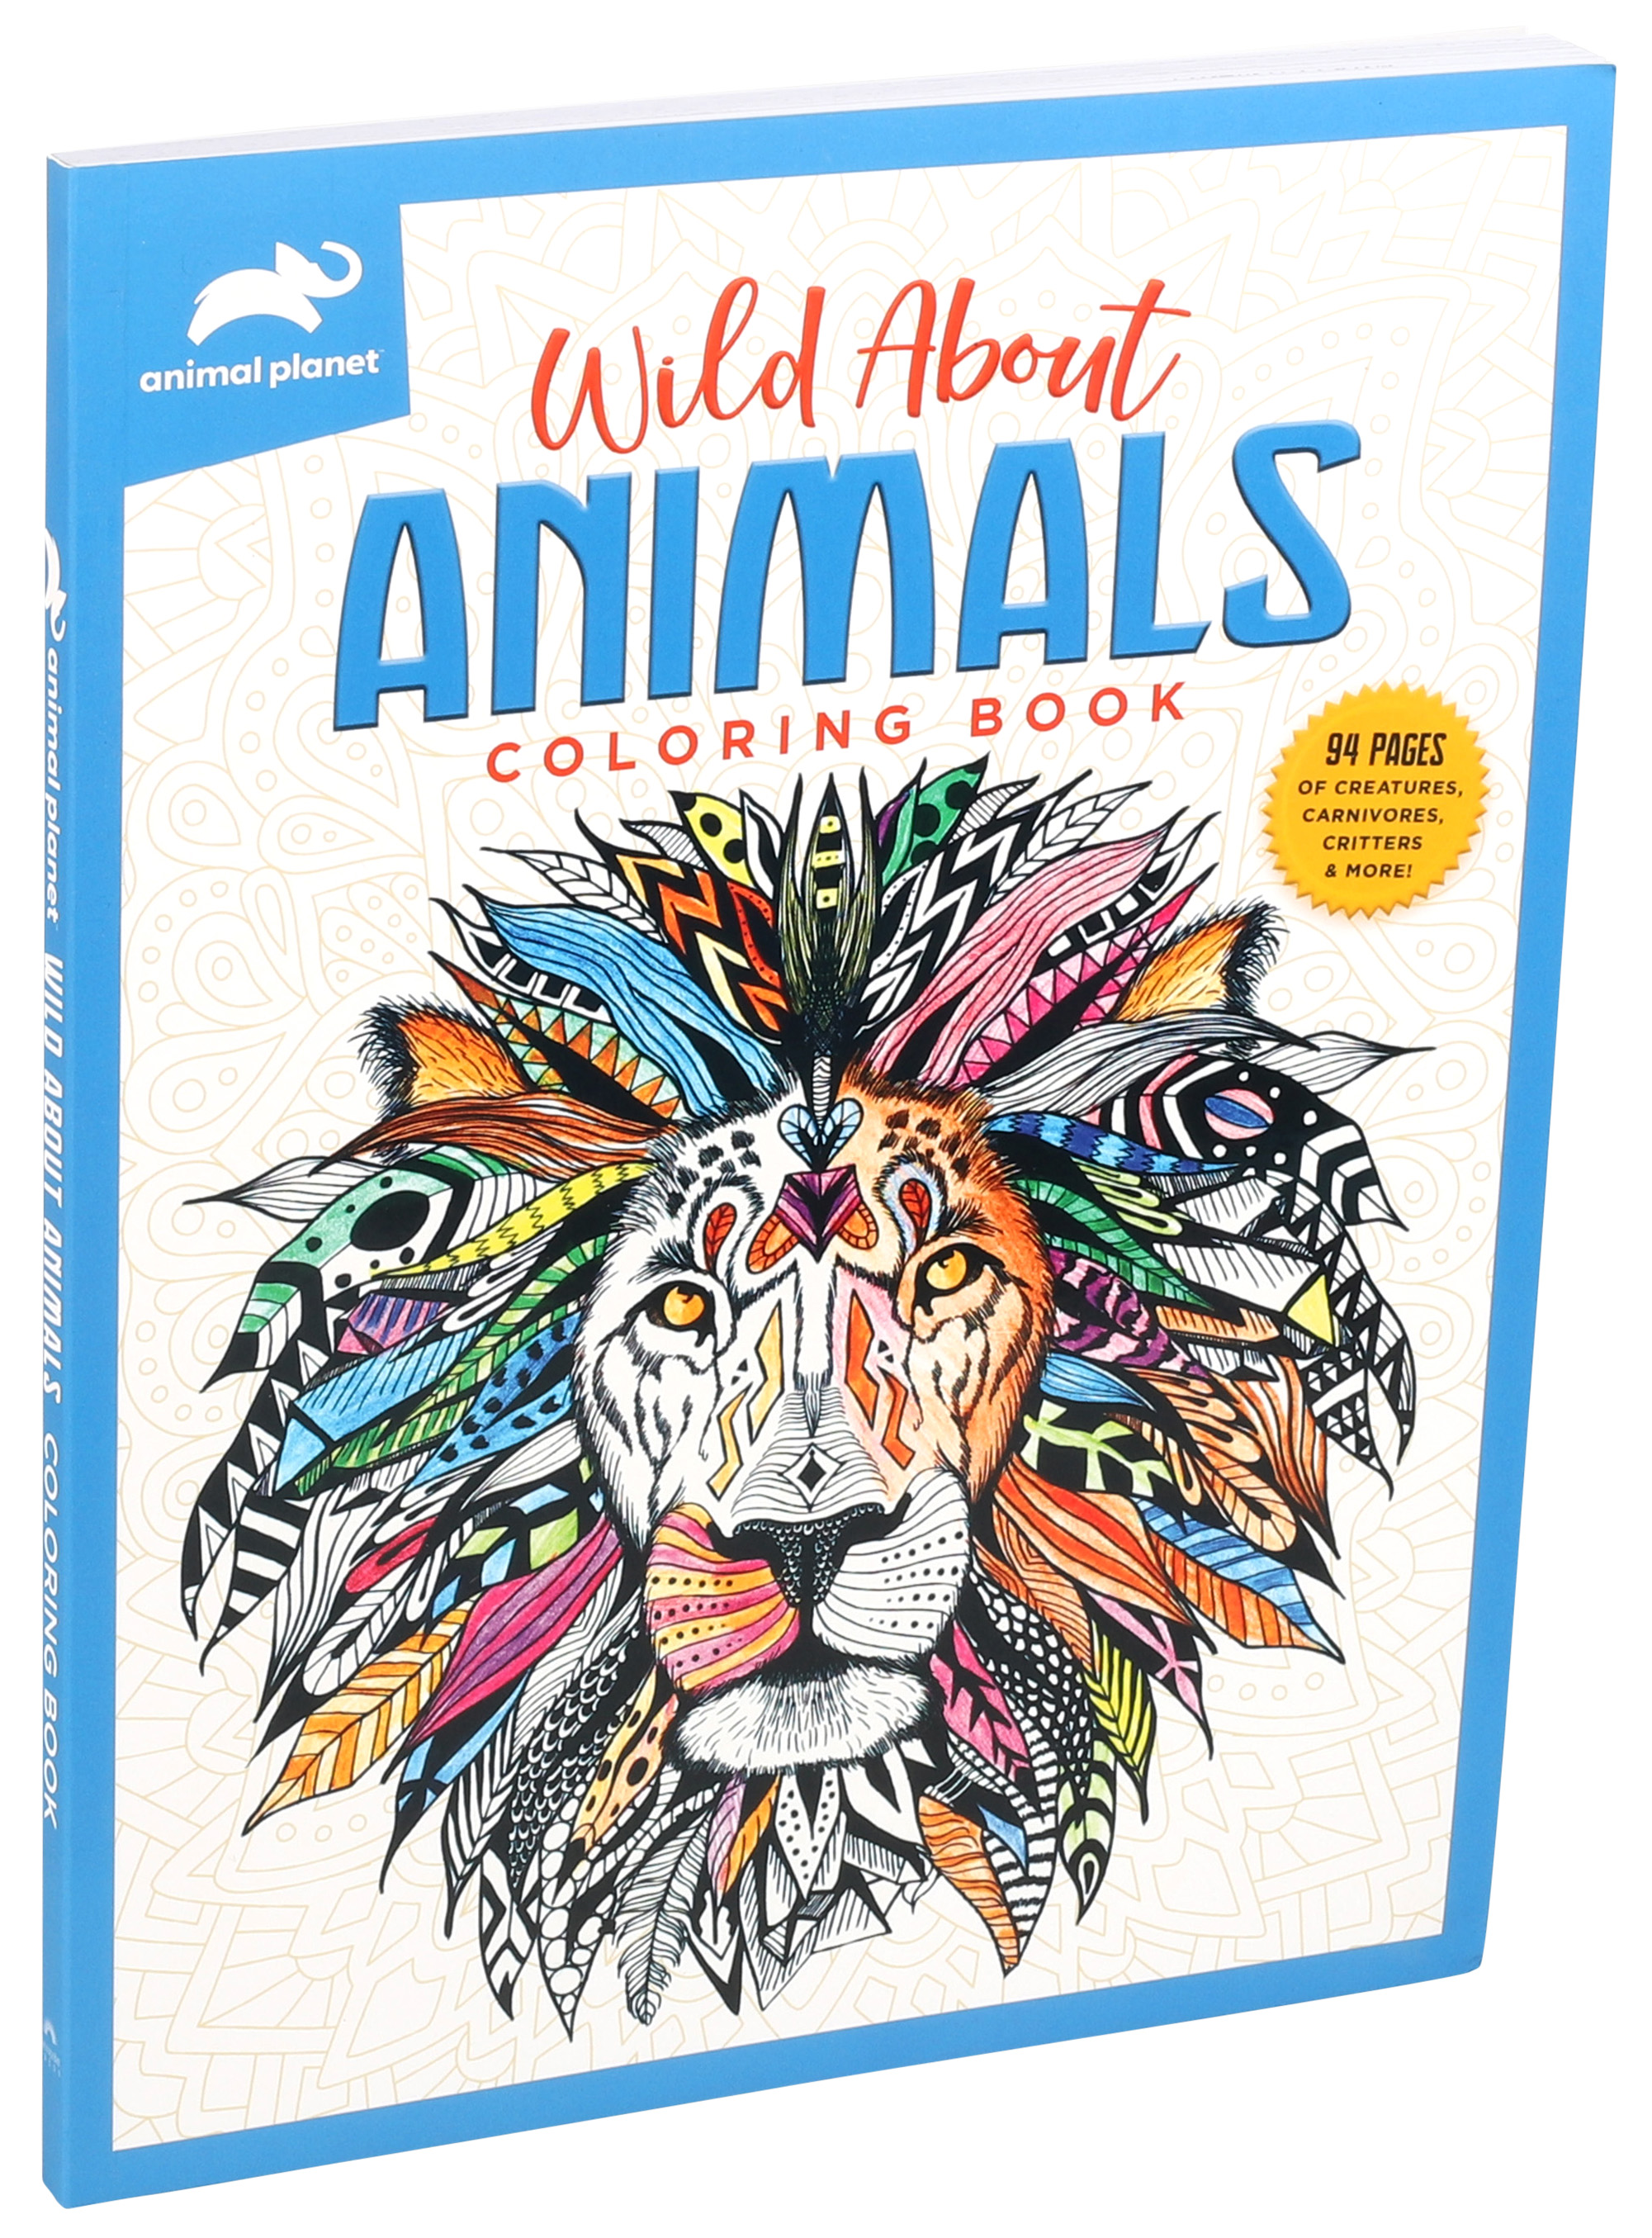 Wild Animal Coloring Book for adults. Relaxing & Calming activity